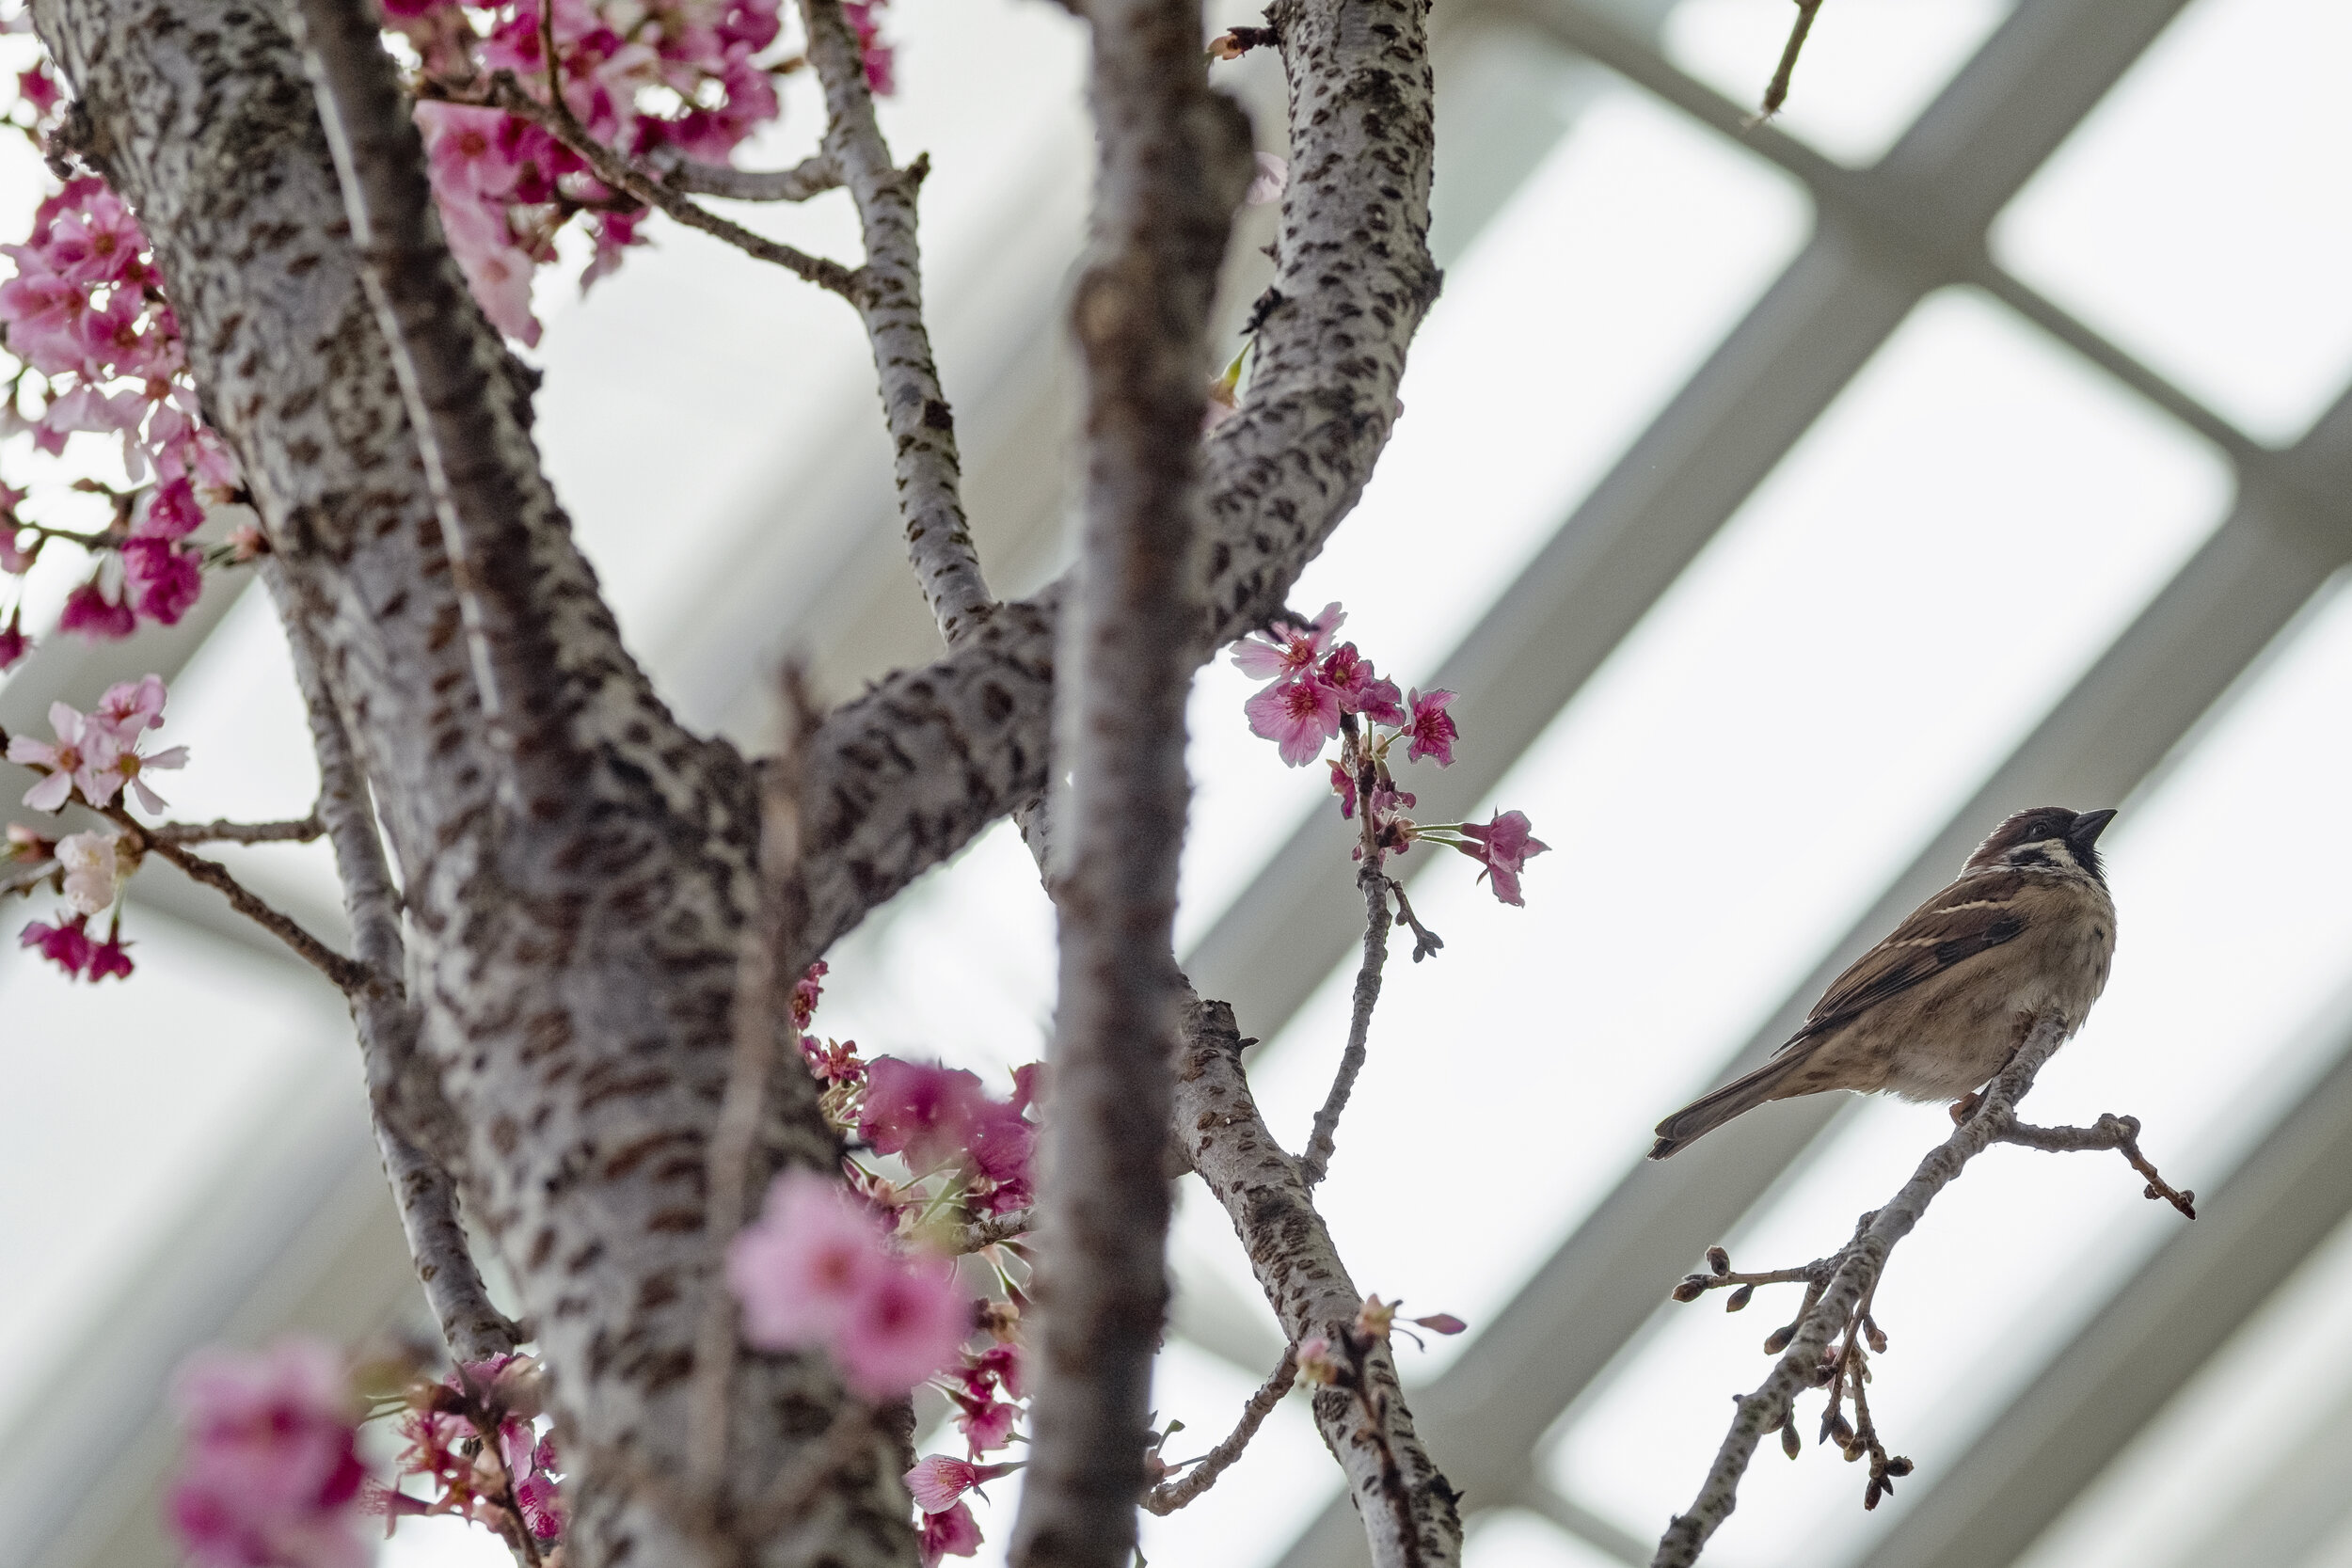  A sparrow perches near cherry blossoms during the Sakura Matsuri floral display at Gardens by the Bay in Singapore 